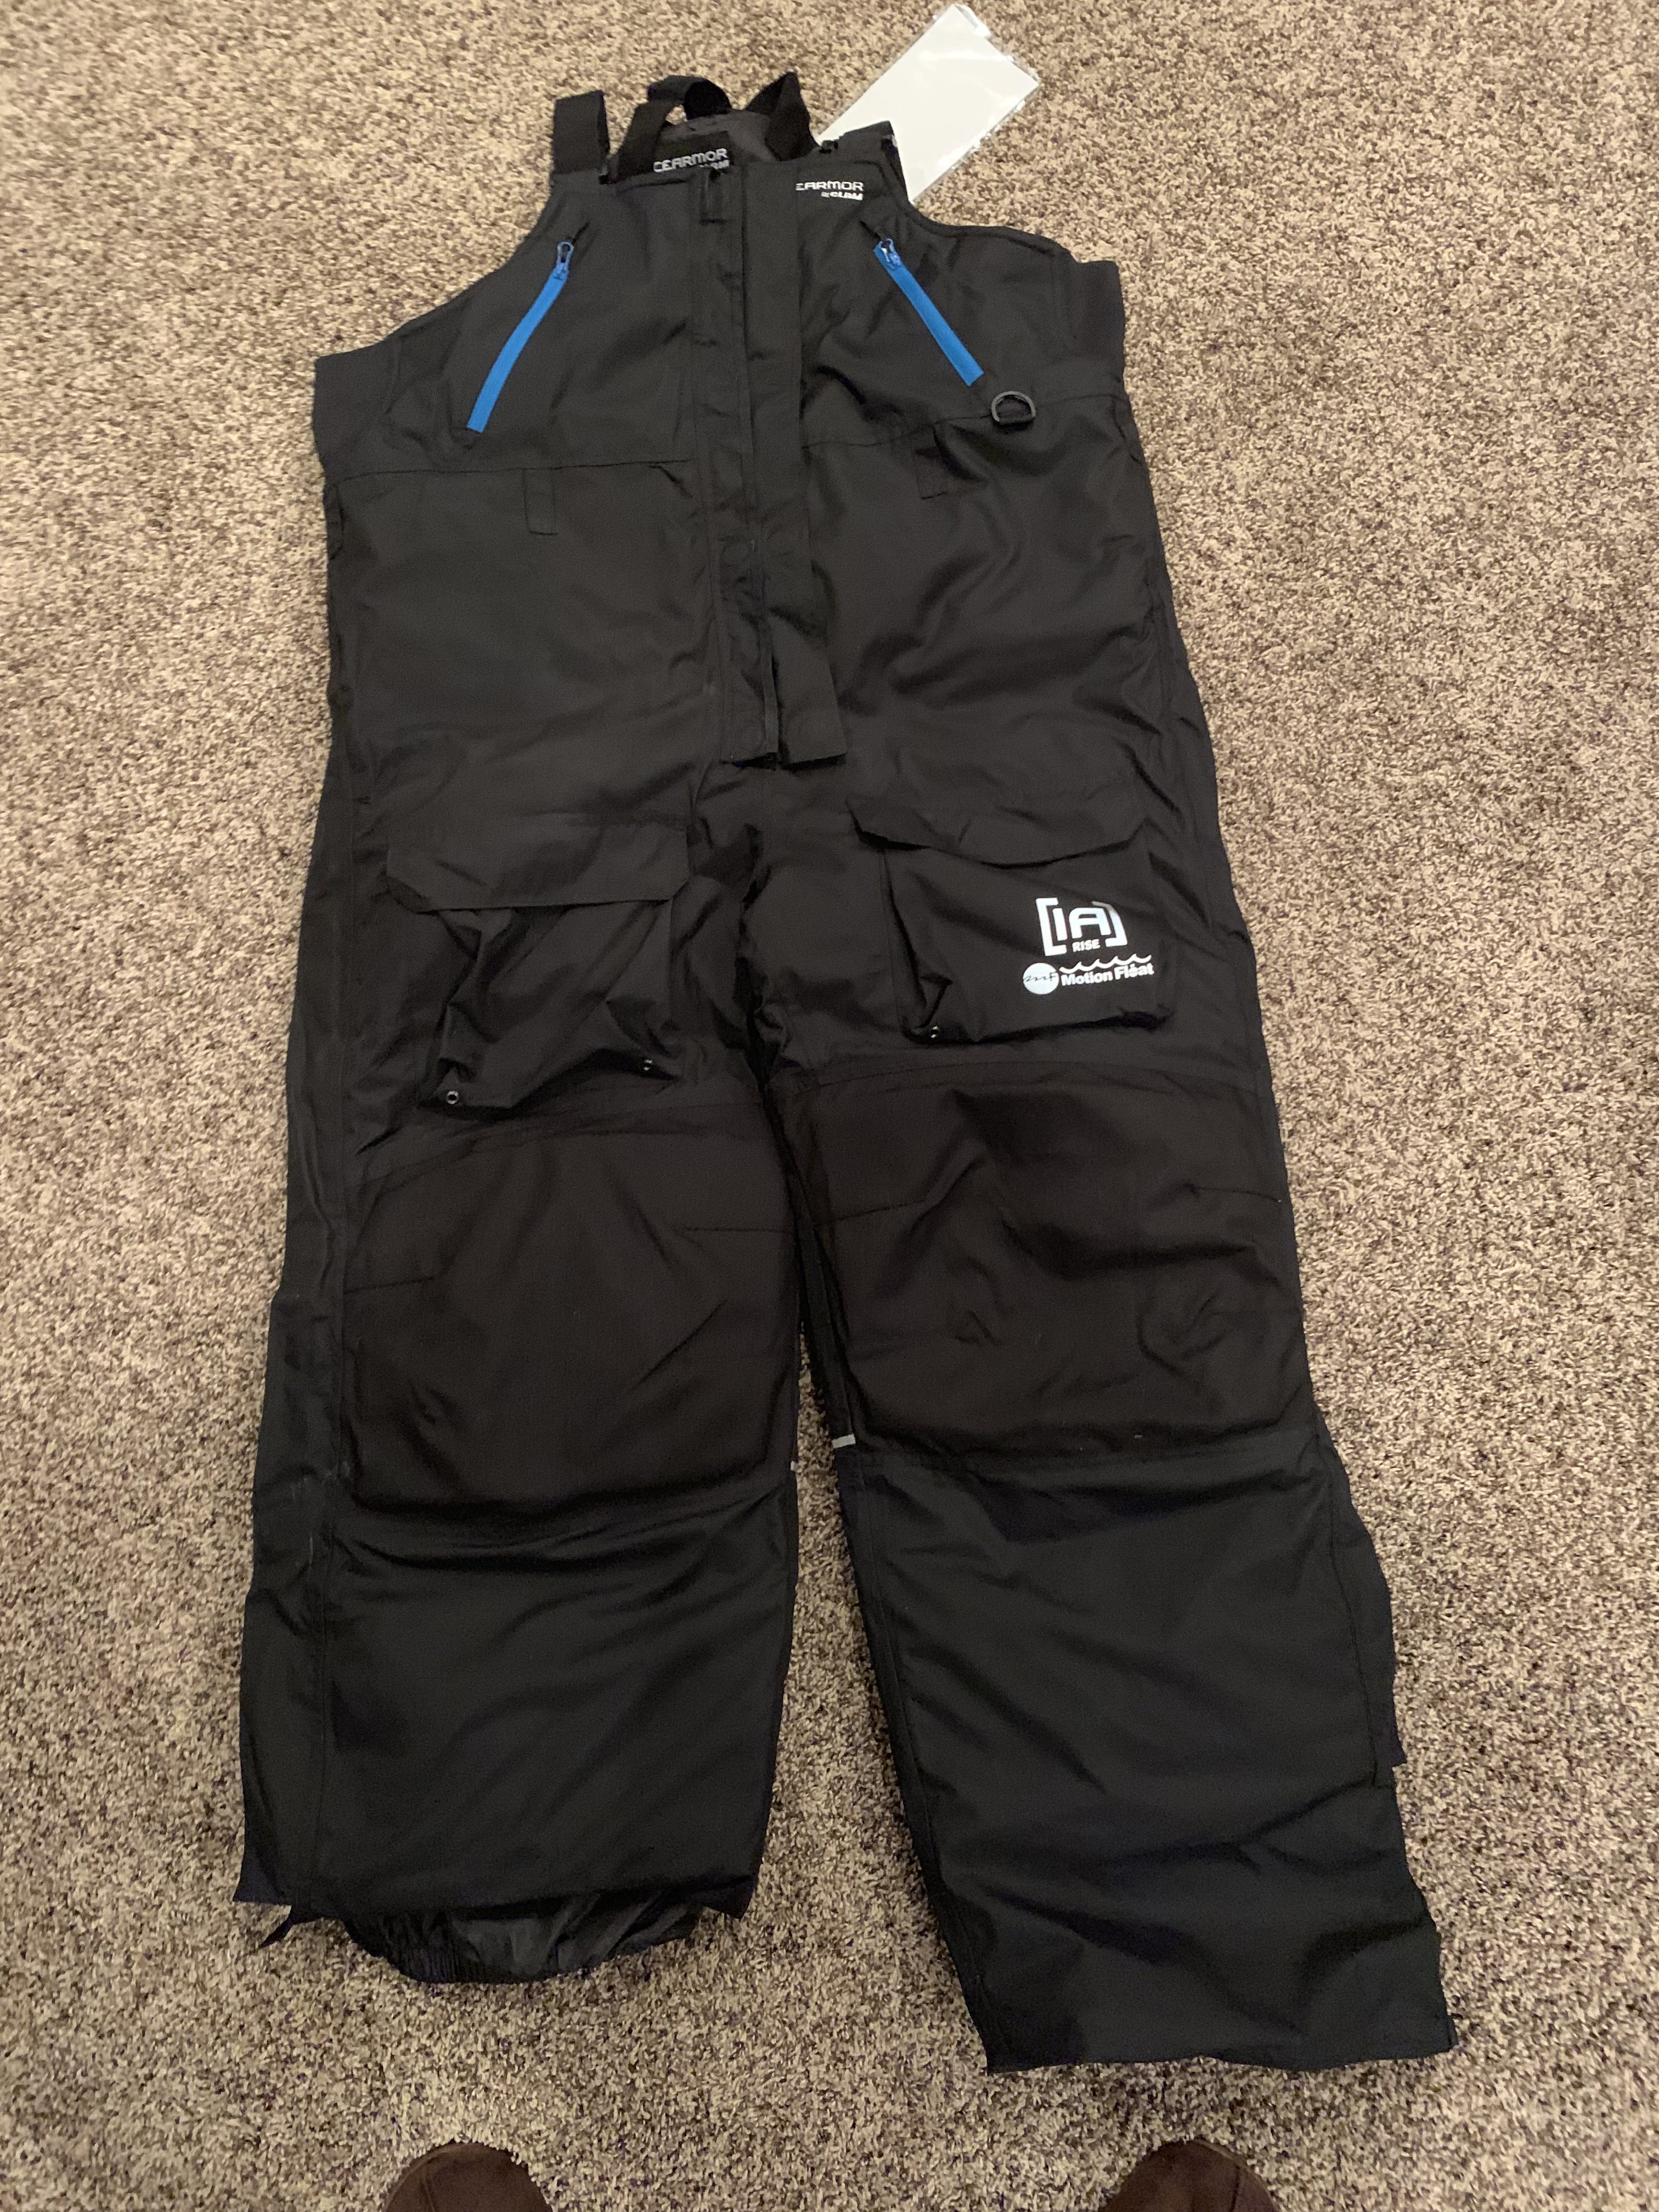 New Ice Armor Rise Float Suit Bibs SIze XL - Classified Ads | In-Depth ...